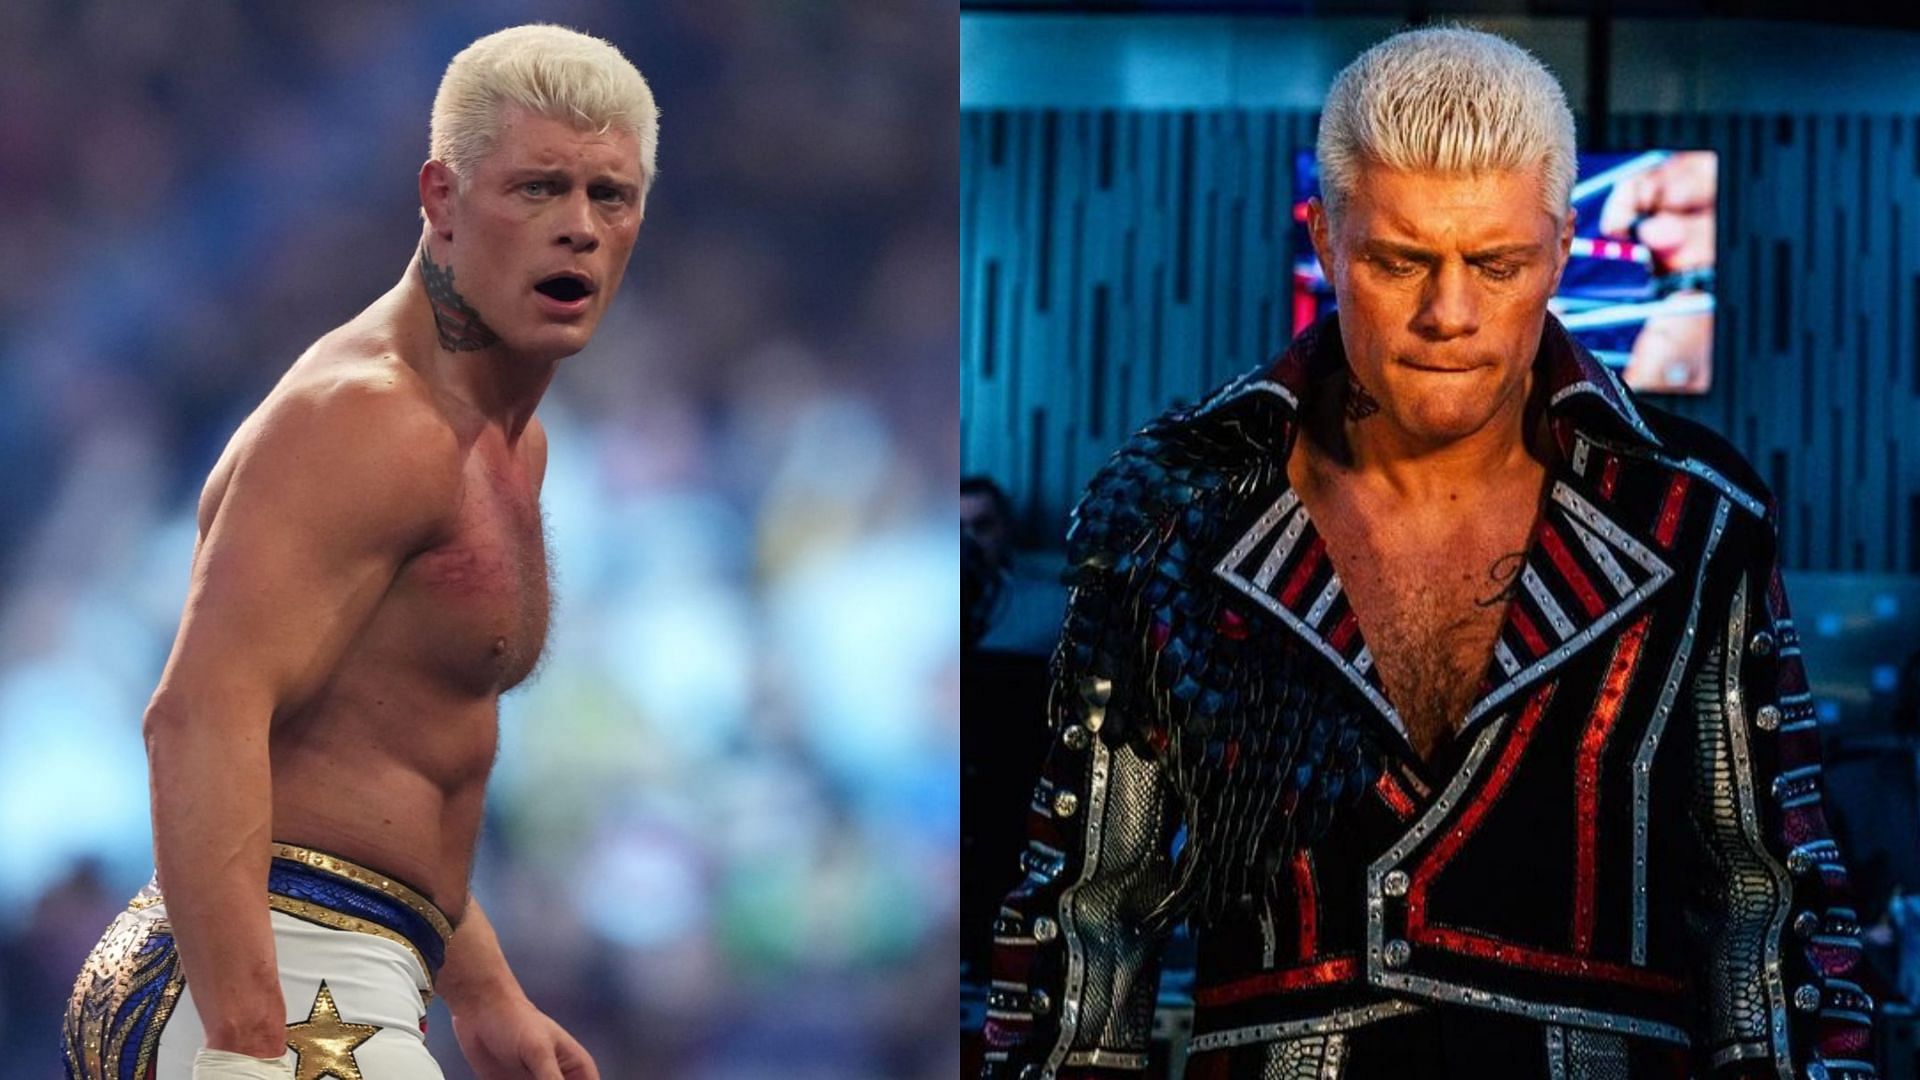 Cody Rhodes will face Roman Reigns at WWE WrestleMania 39